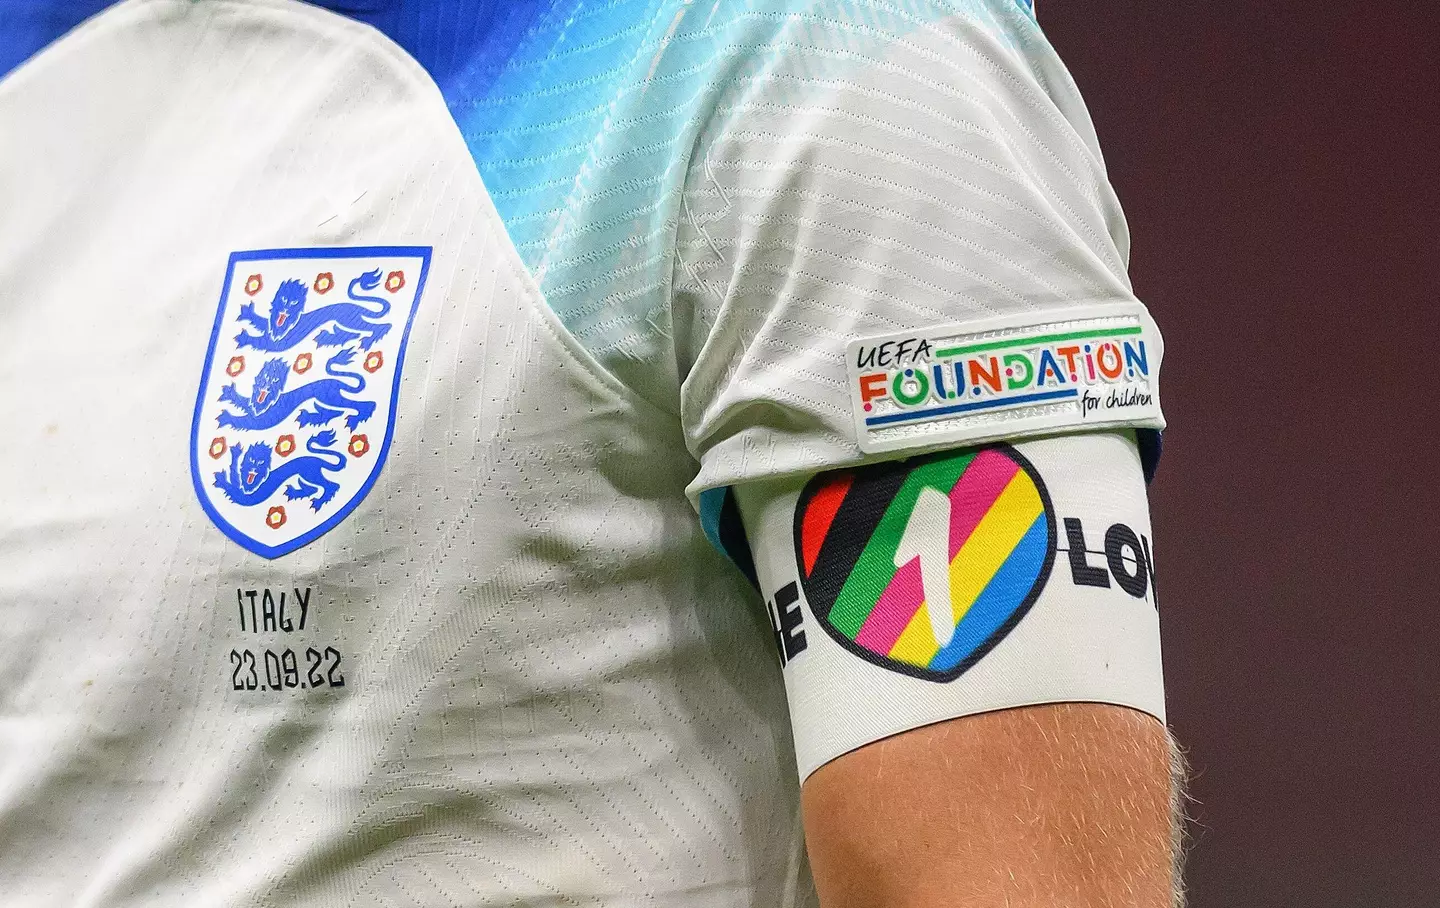 England and Wales won't be wearing the One Love armbands.